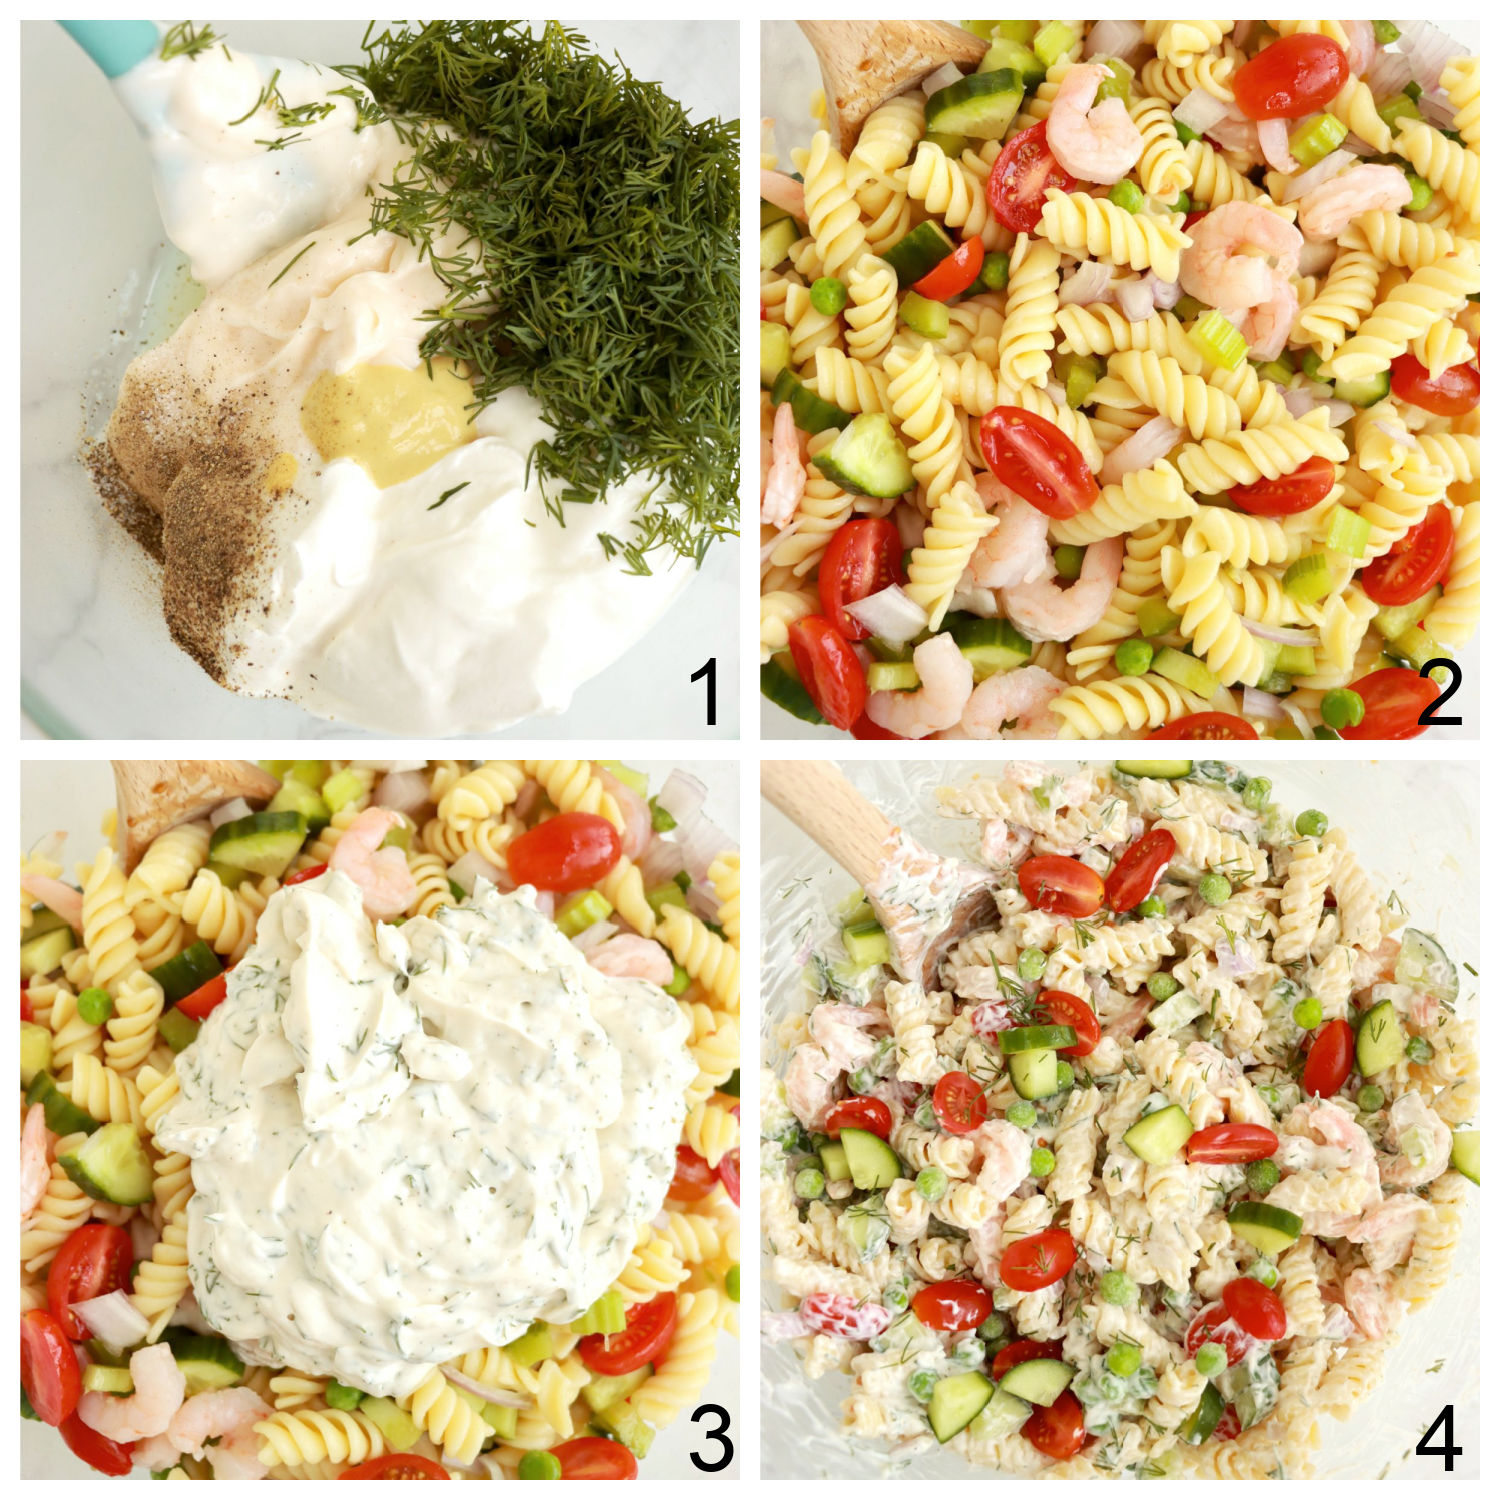 steps for making dill pasta salad with shrimp